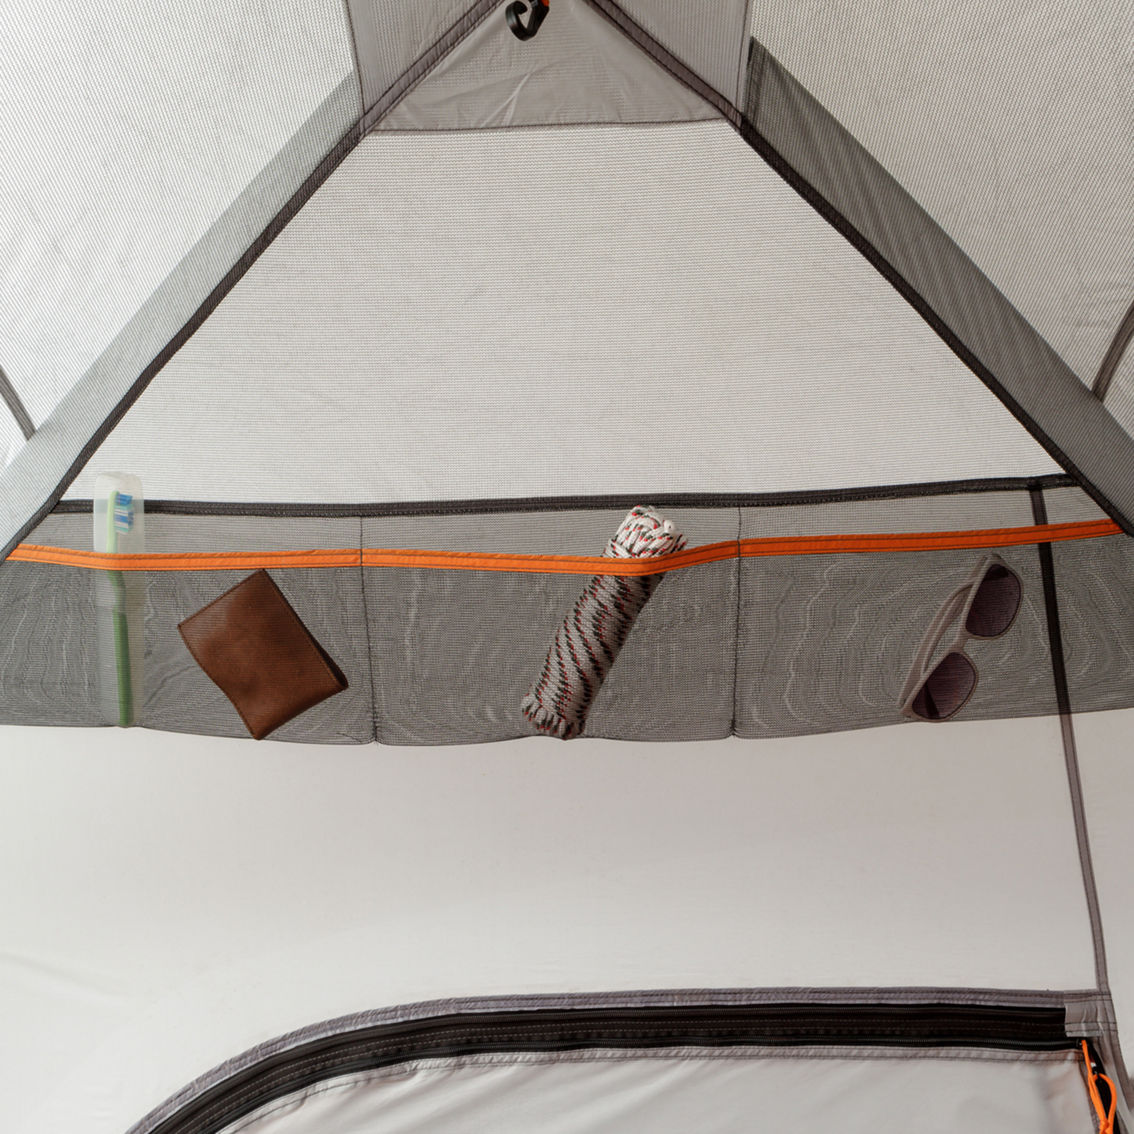 Core Equipment 6 Person Dome Tent - Image 6 of 6